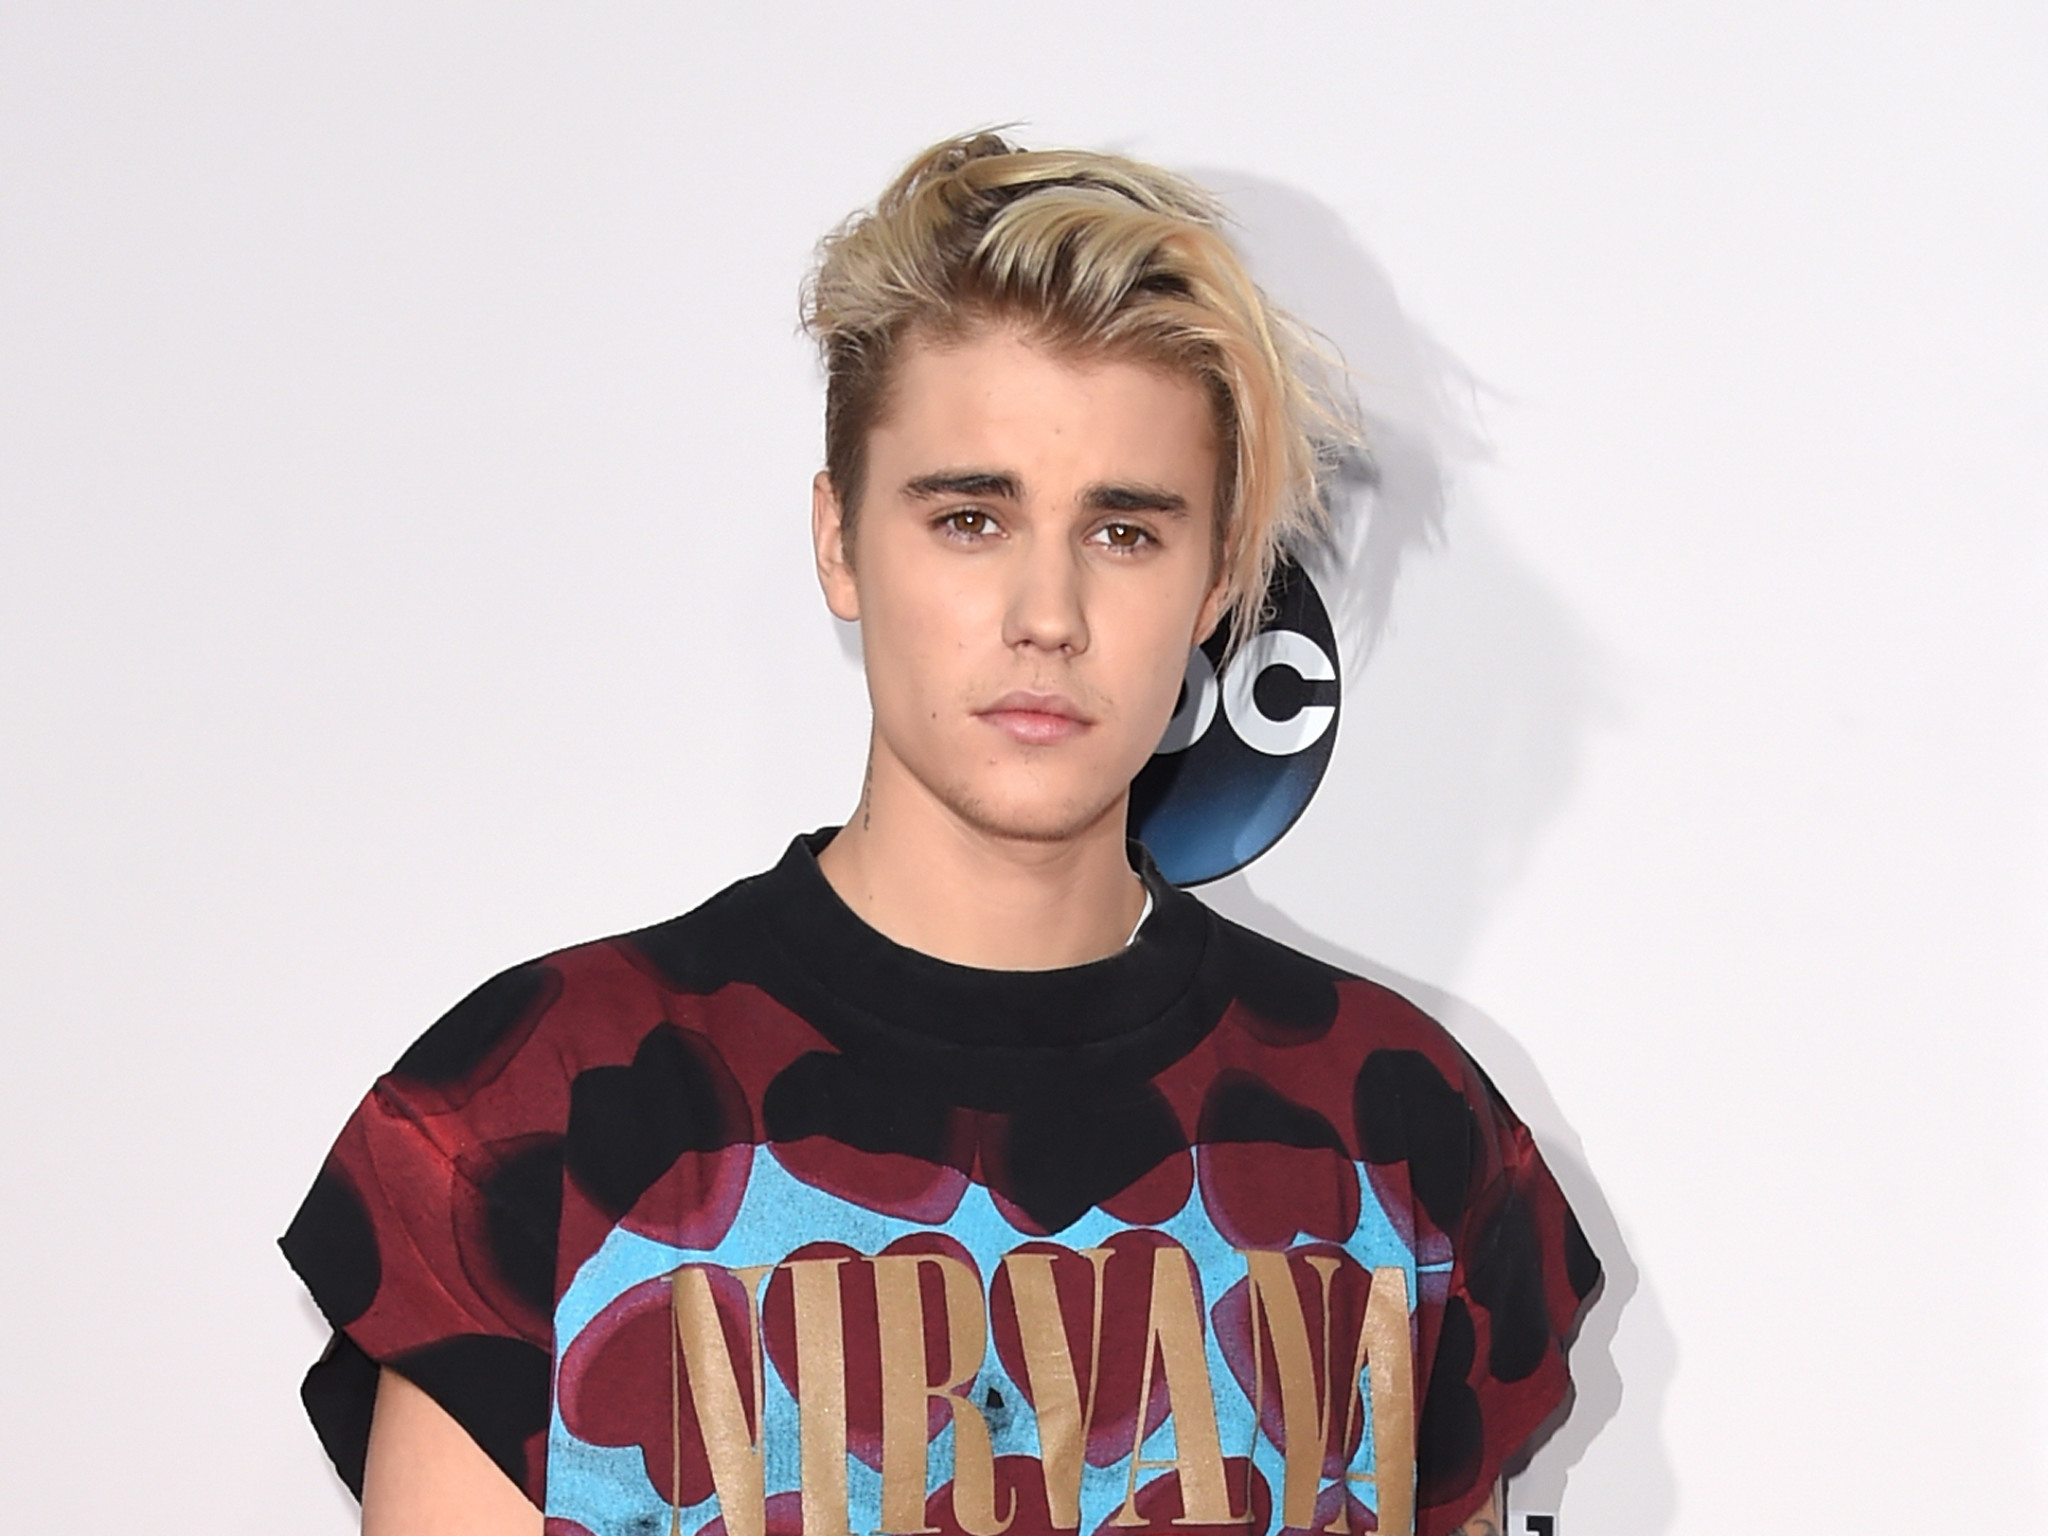 2048x1536 justin-bieber-is-being-sued-for-allegedly-copying-his-hit-sorry -from-another-artist